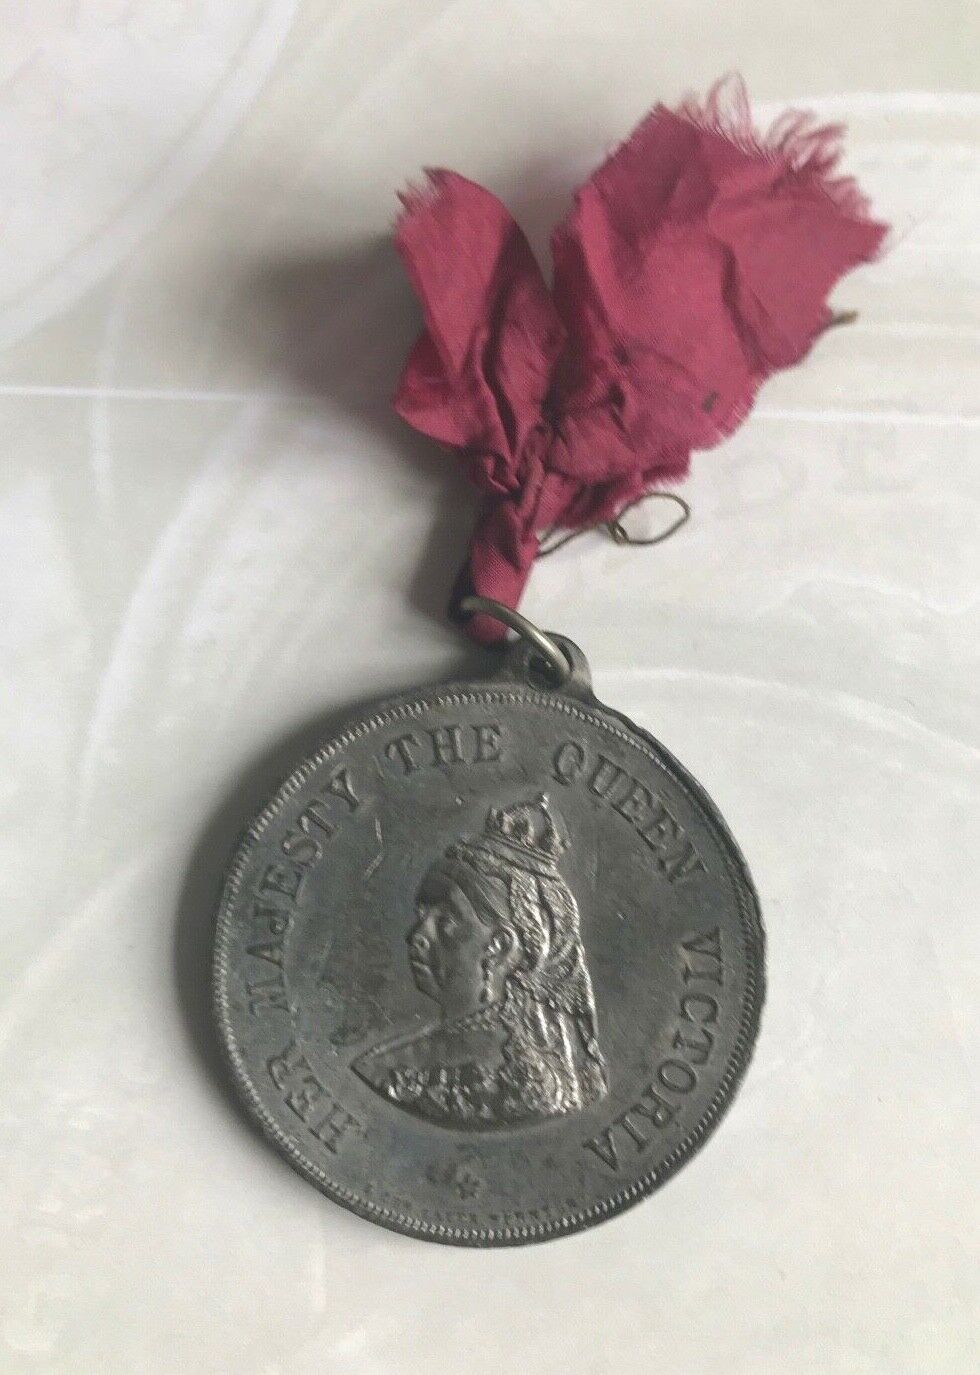 1837 1887 QUEEN VICTORIA MEDAL- JUBILEE OF THE REIGN